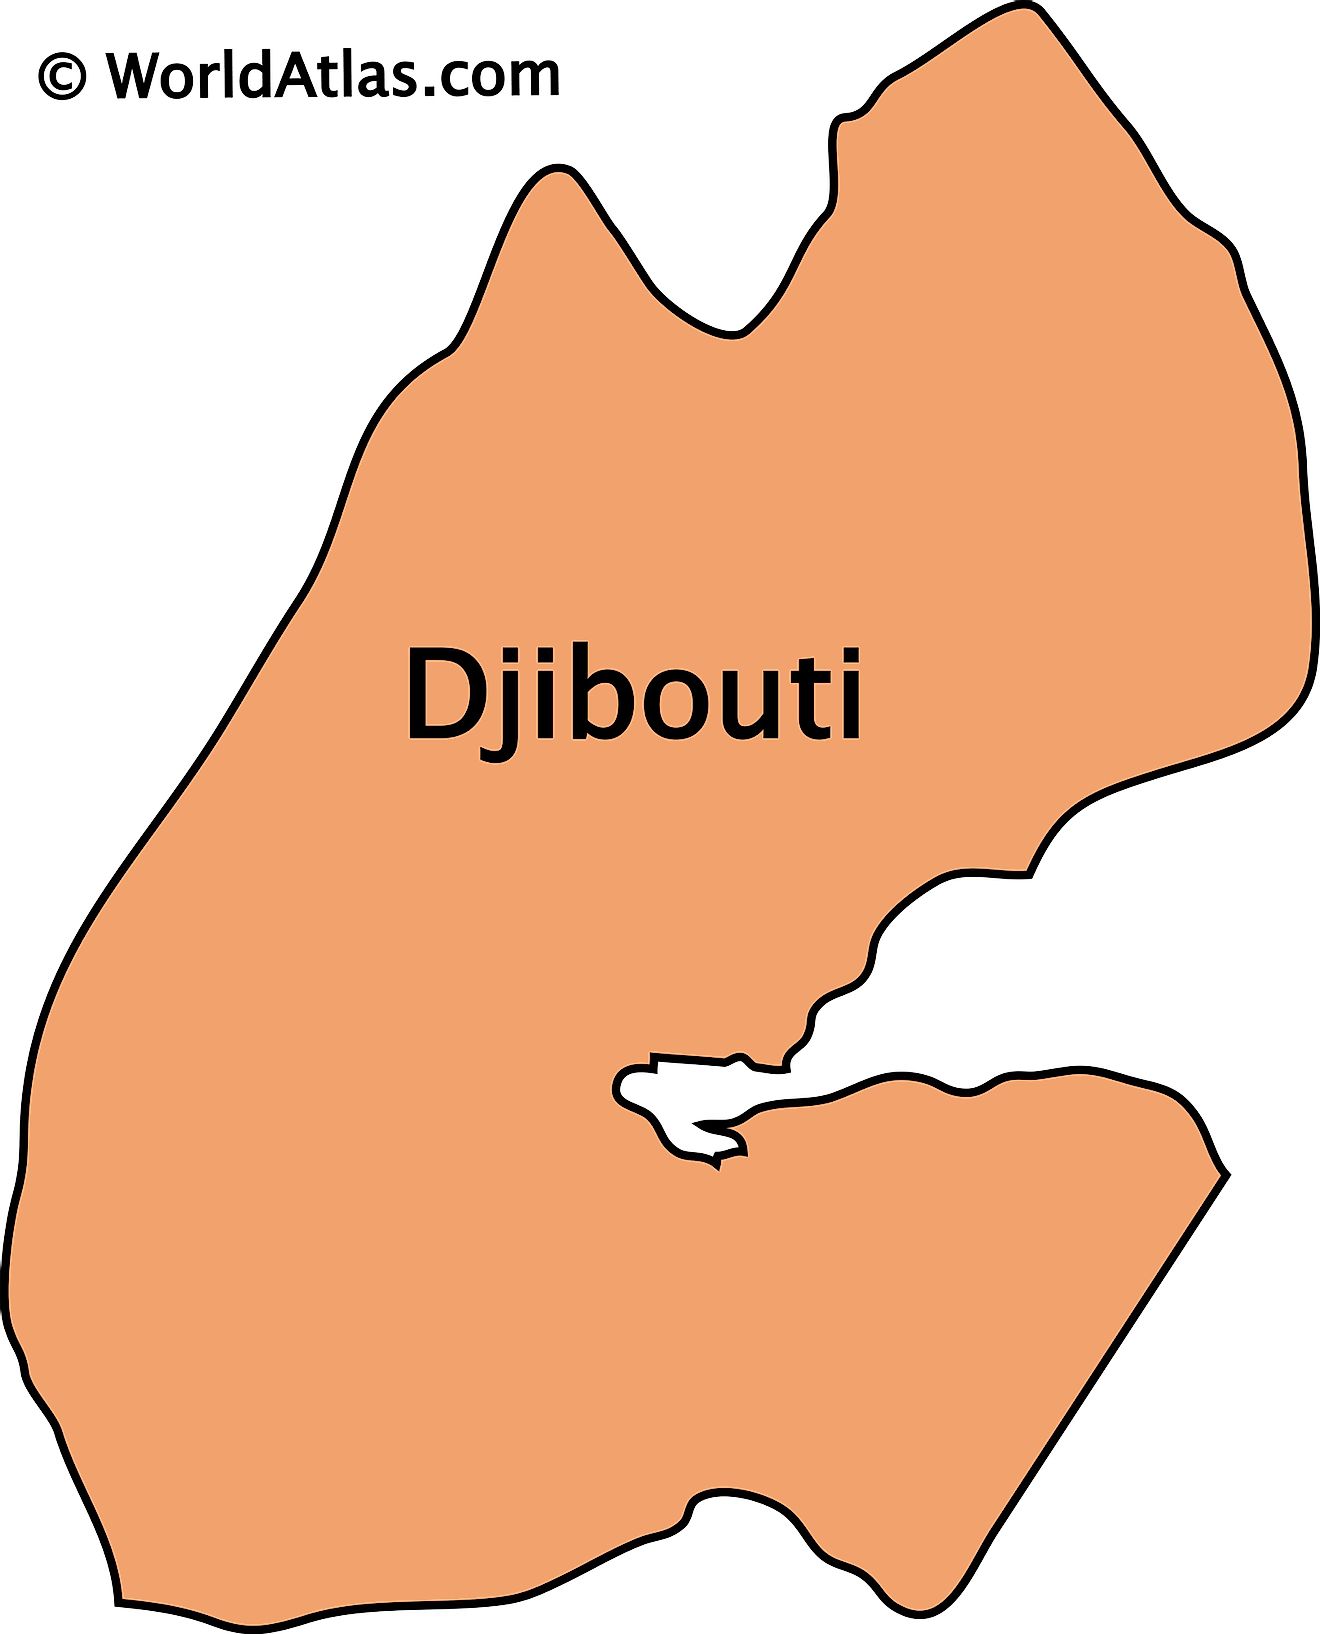 Outline Map of Djibouti